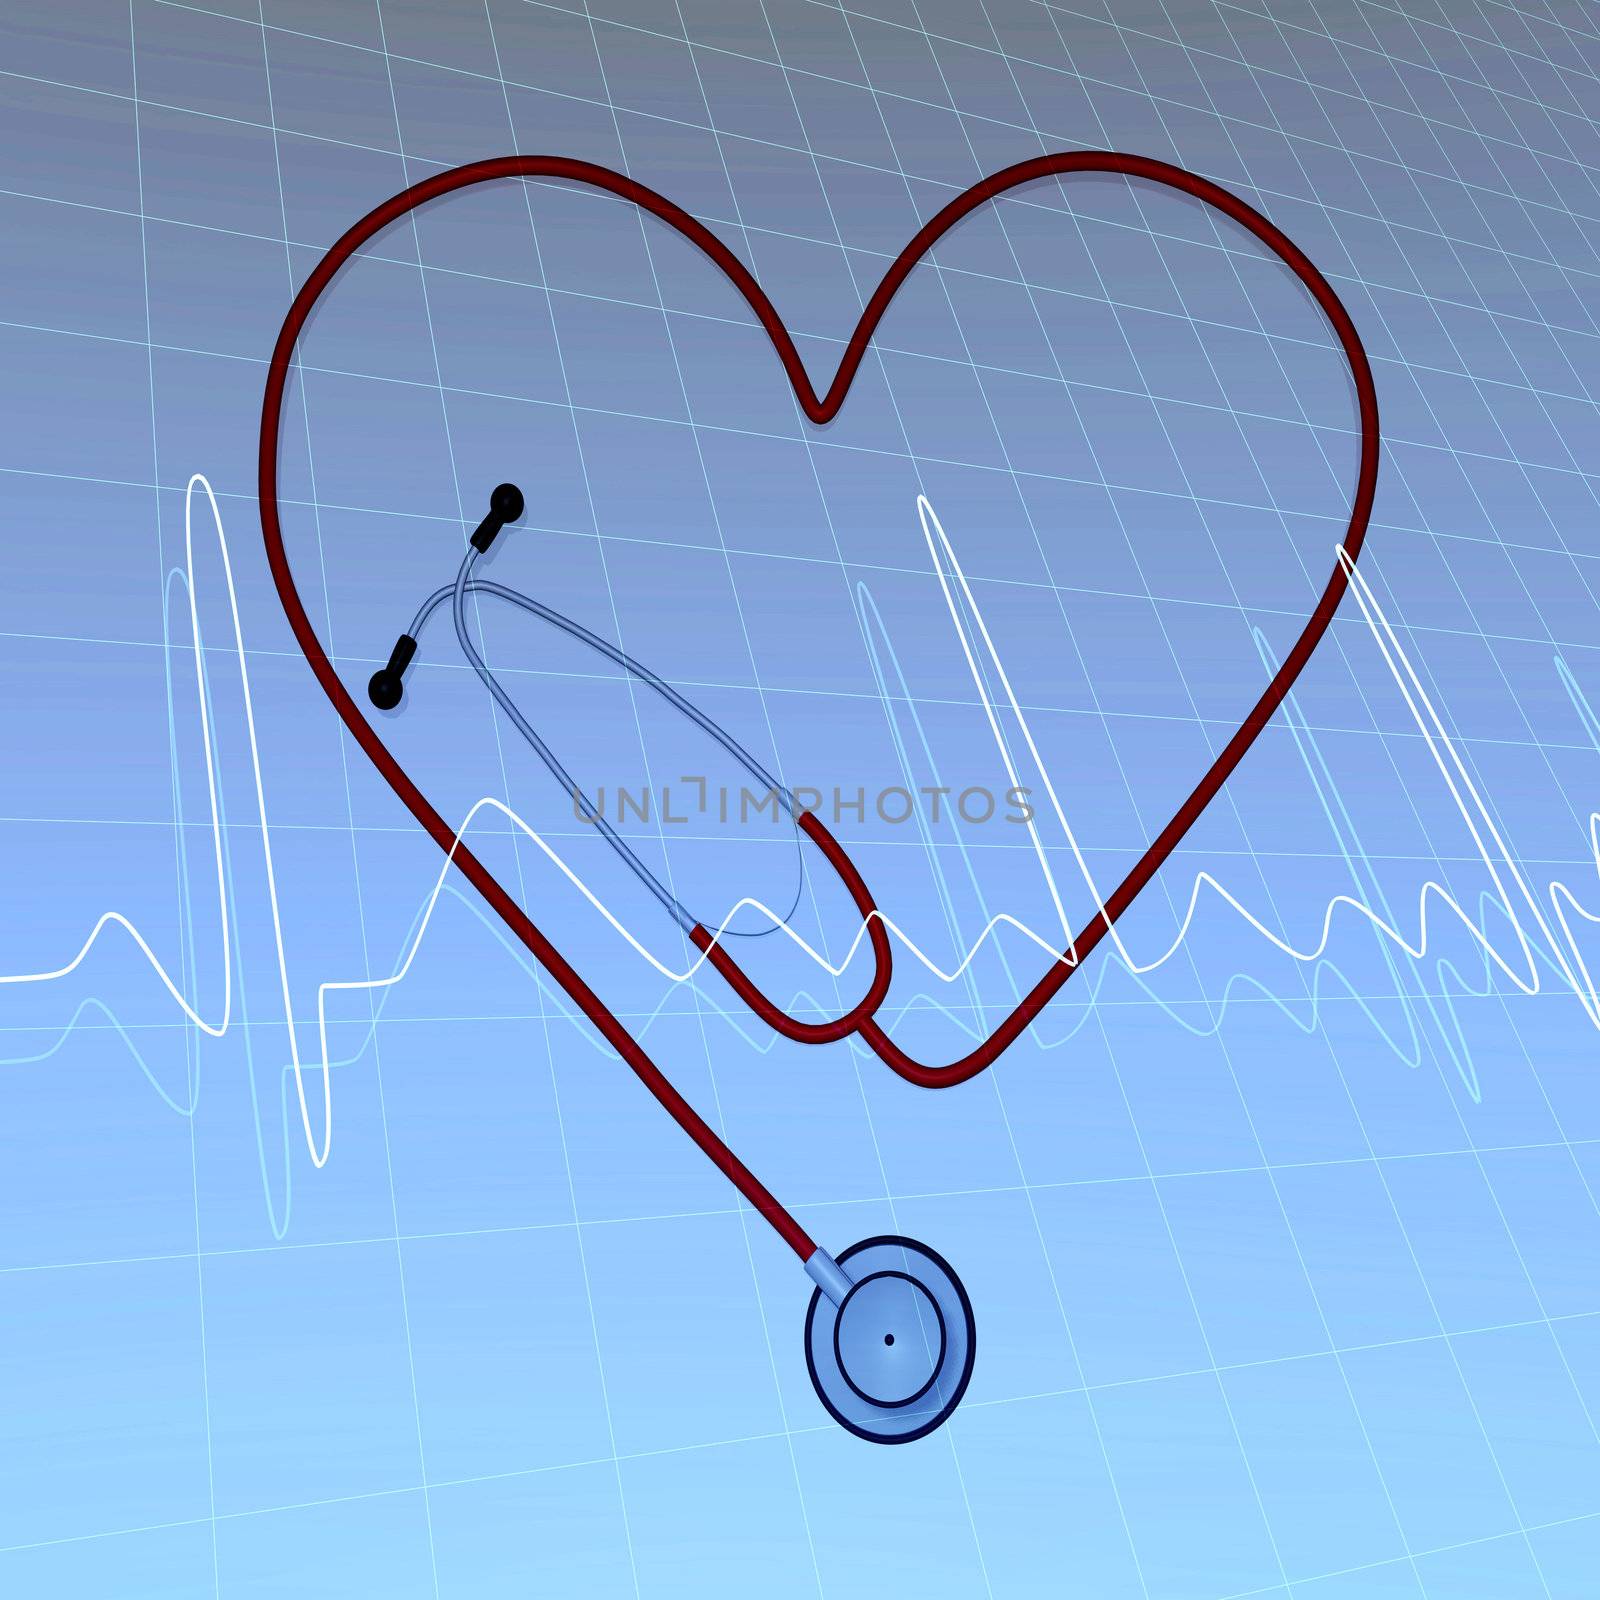 Abstract background image with ECG curves and stethoscope in the shape of a heart.